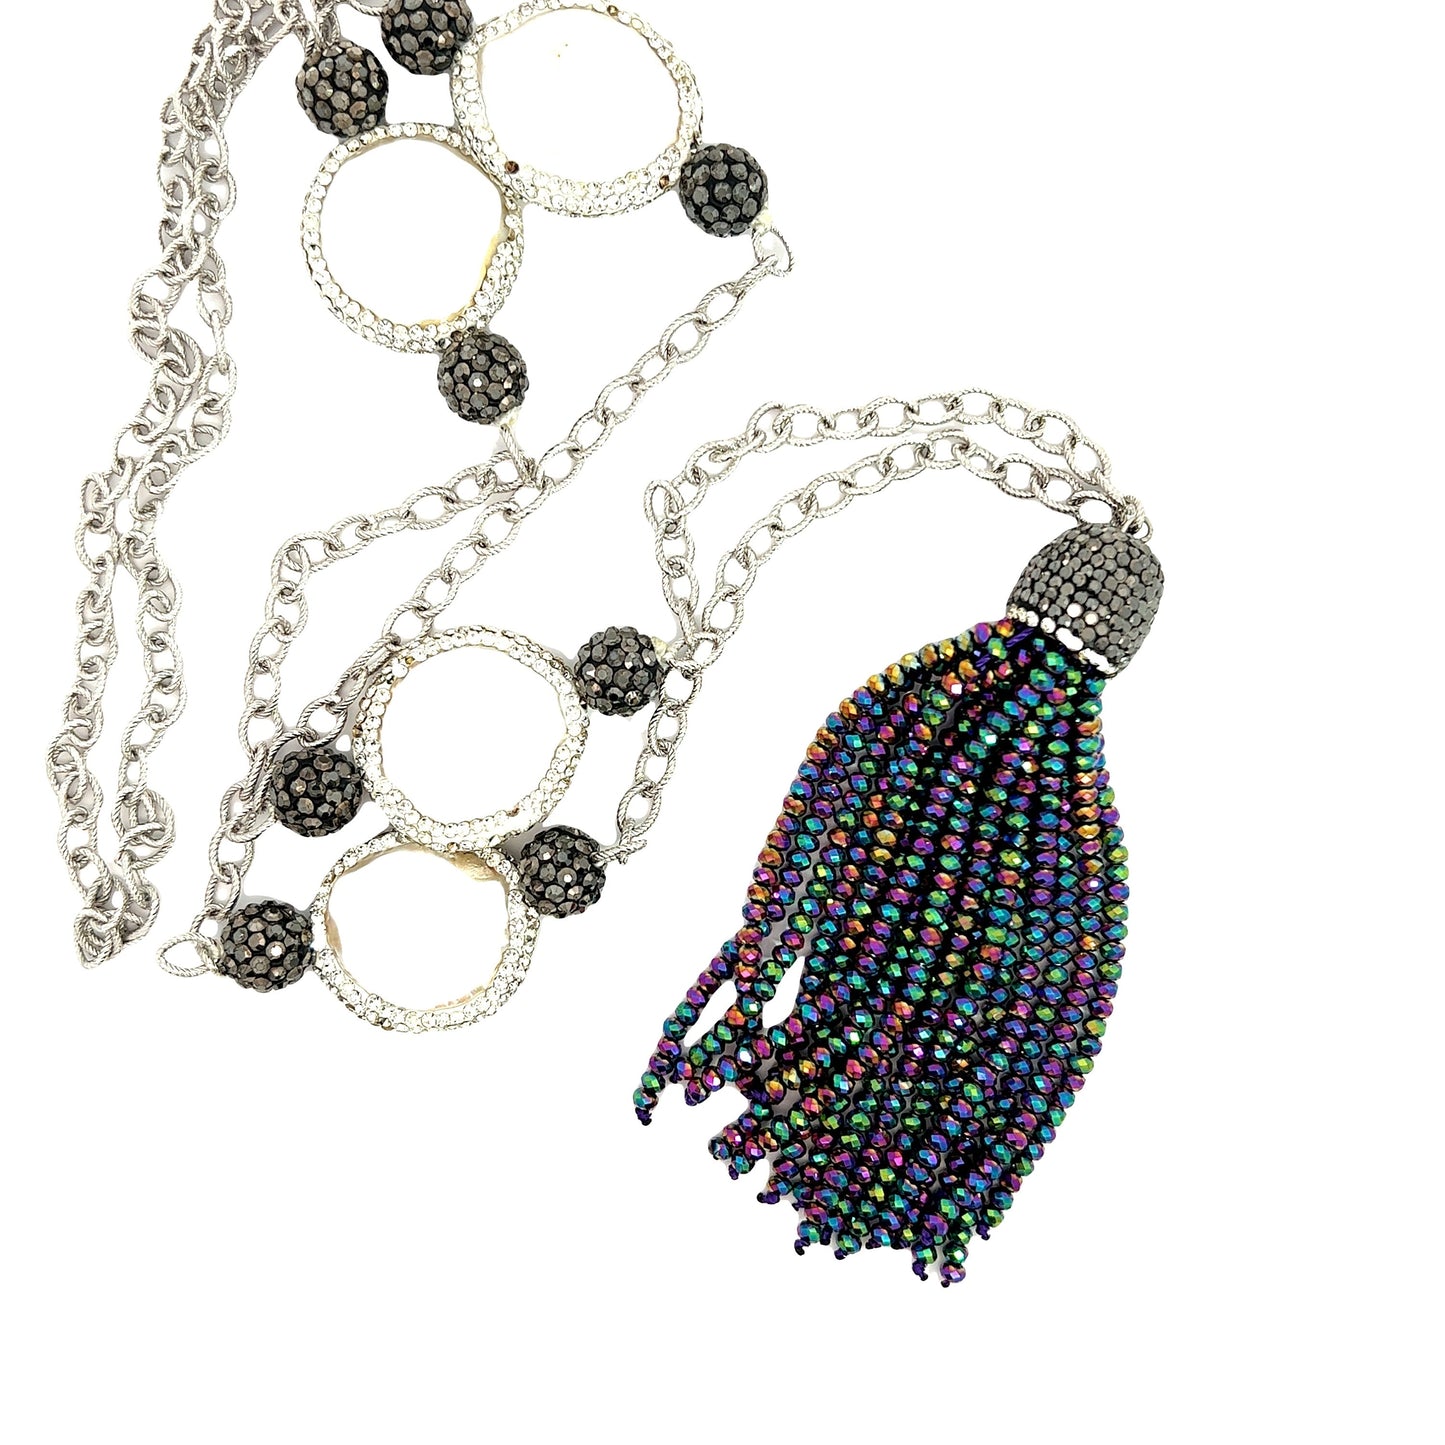 Multicolored Pearl and Crystal Necklace - Born To Glam